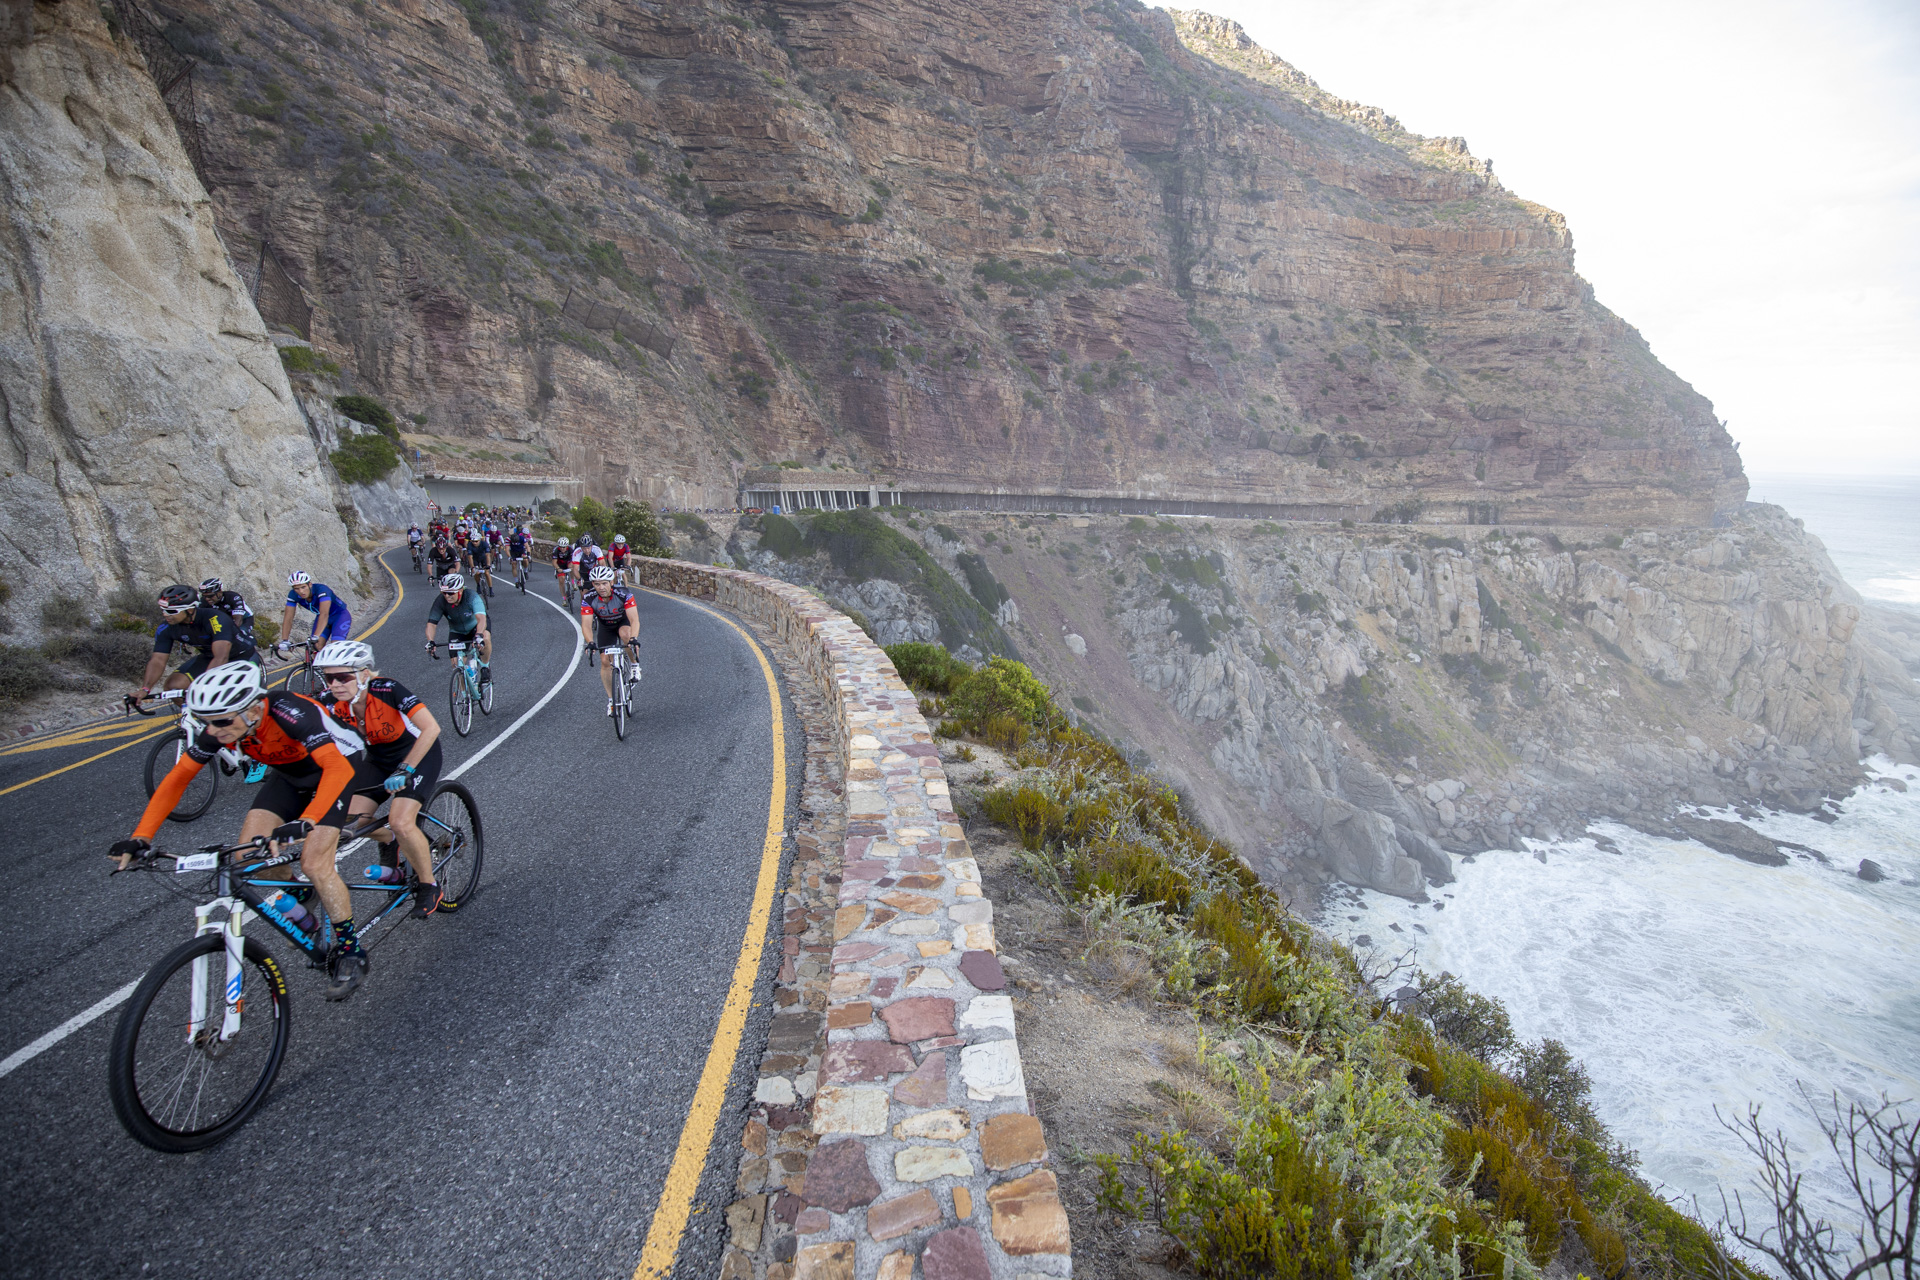 cape town cycle tour seeding groups